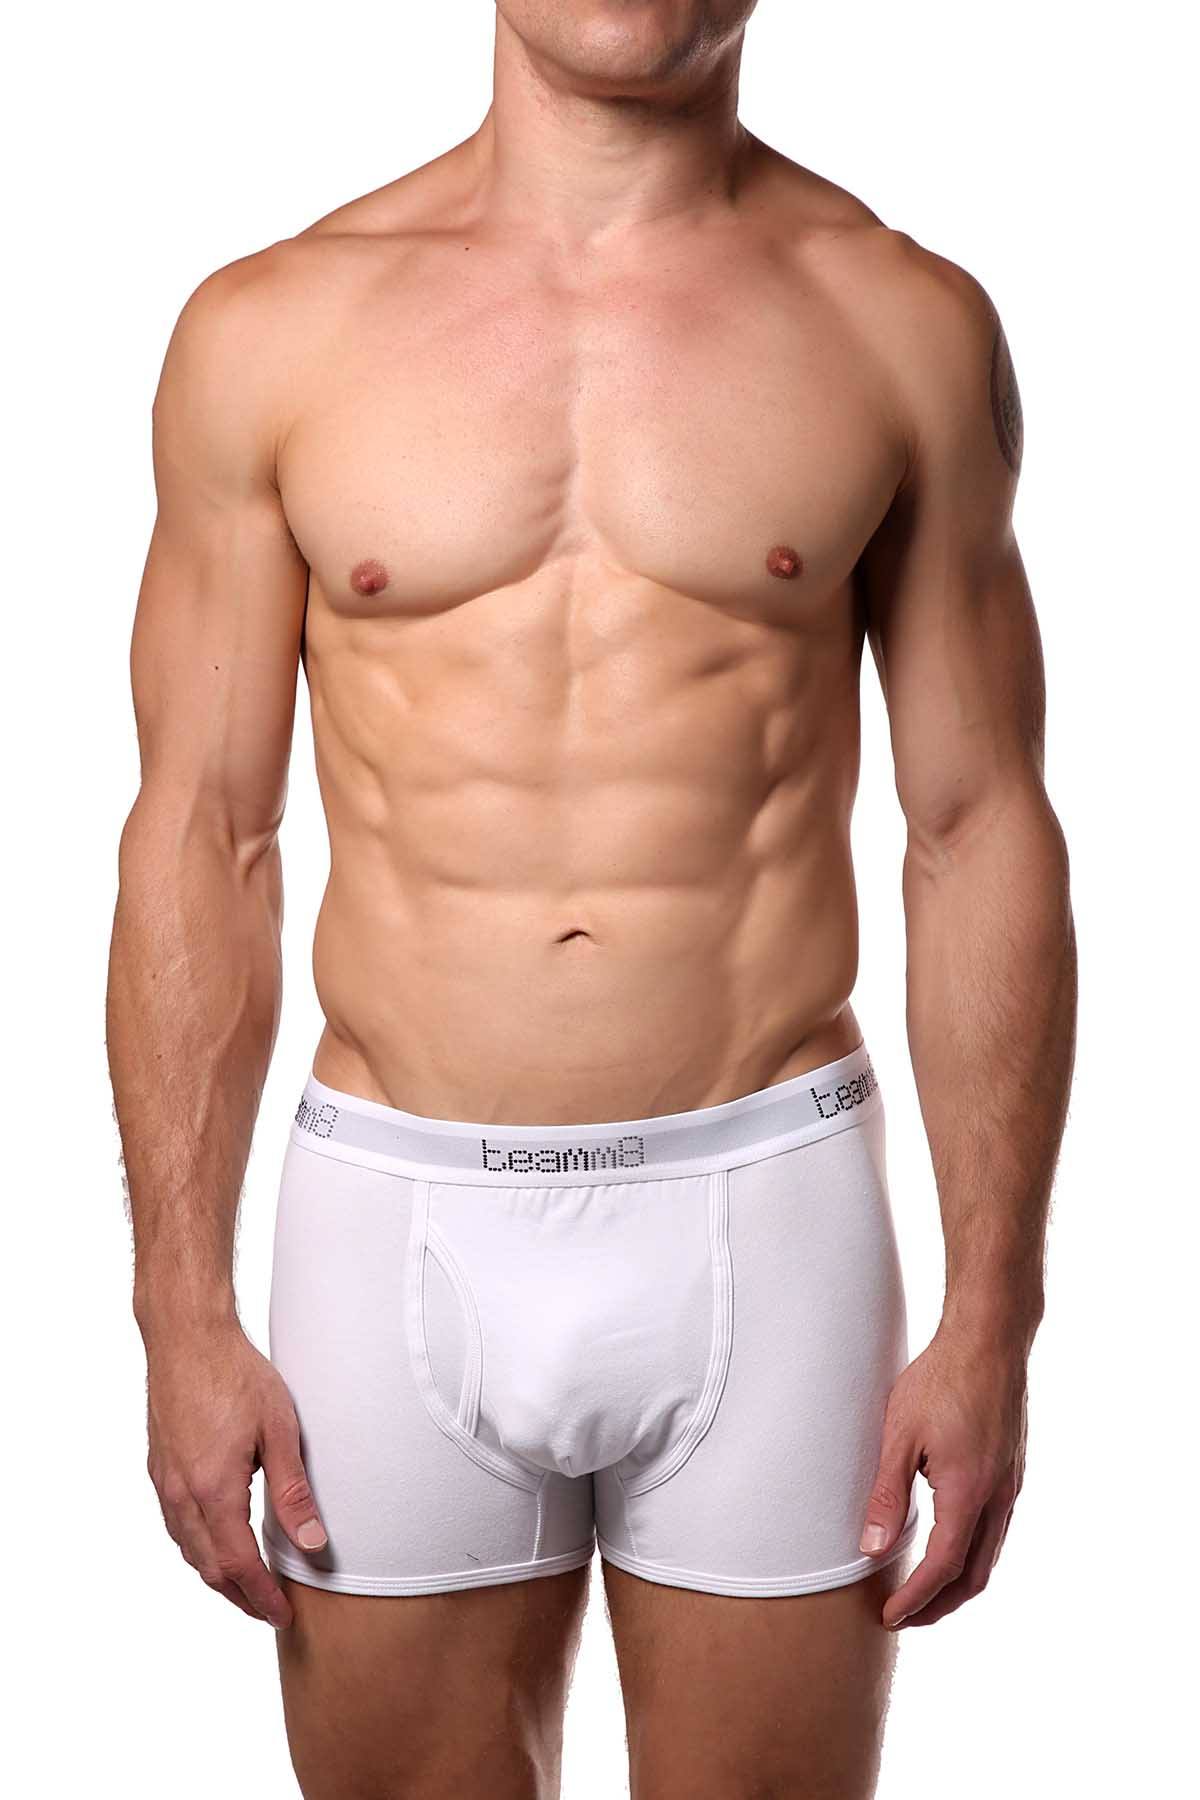 Teamm8 White Classic Trunk